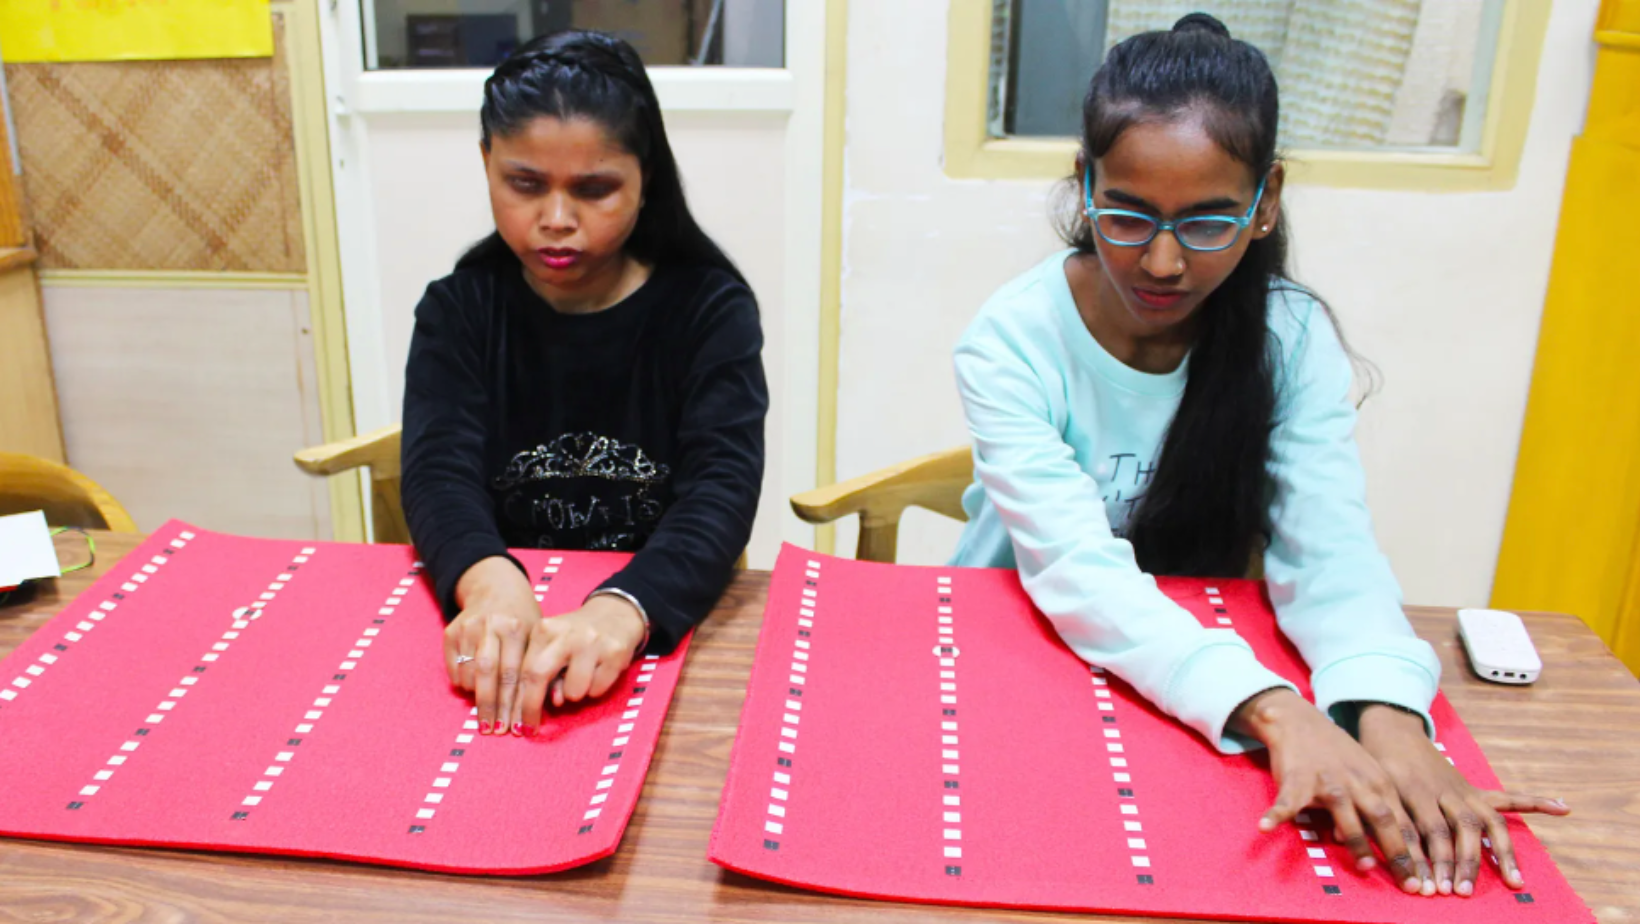 Two Indian women are dressed casually and seated at a table, reading braille on specially designed flexible sheets.